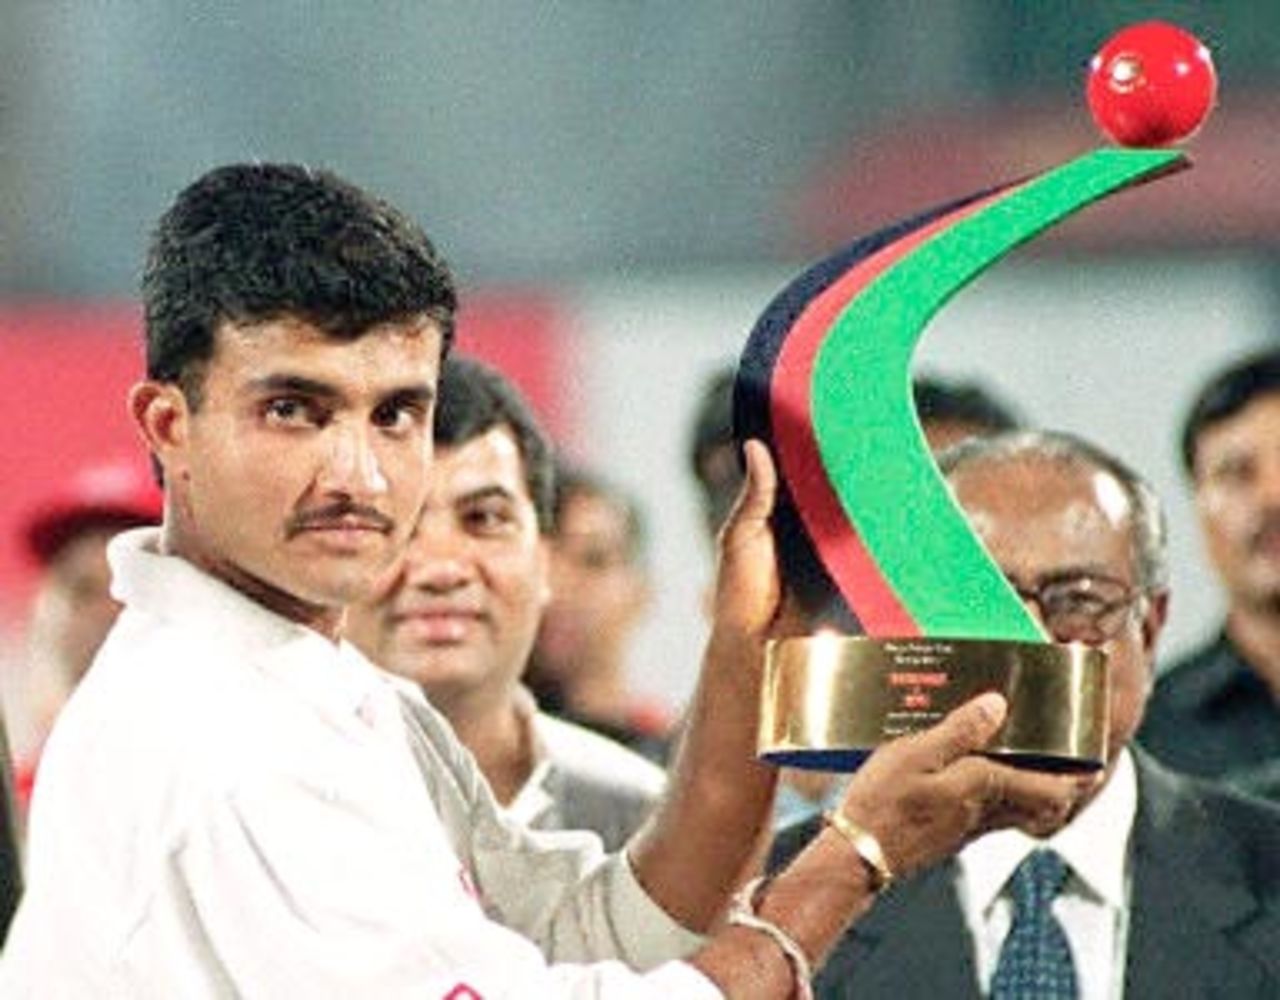 Indian skipper Sourav Ganguly shows the winners trophy 13 November 2000 at the Bangabandhu National Stadium in downtown Dhaka. India won by nine wickets by the end of fourth day's play of Bangladesh's inaugural five day test match.